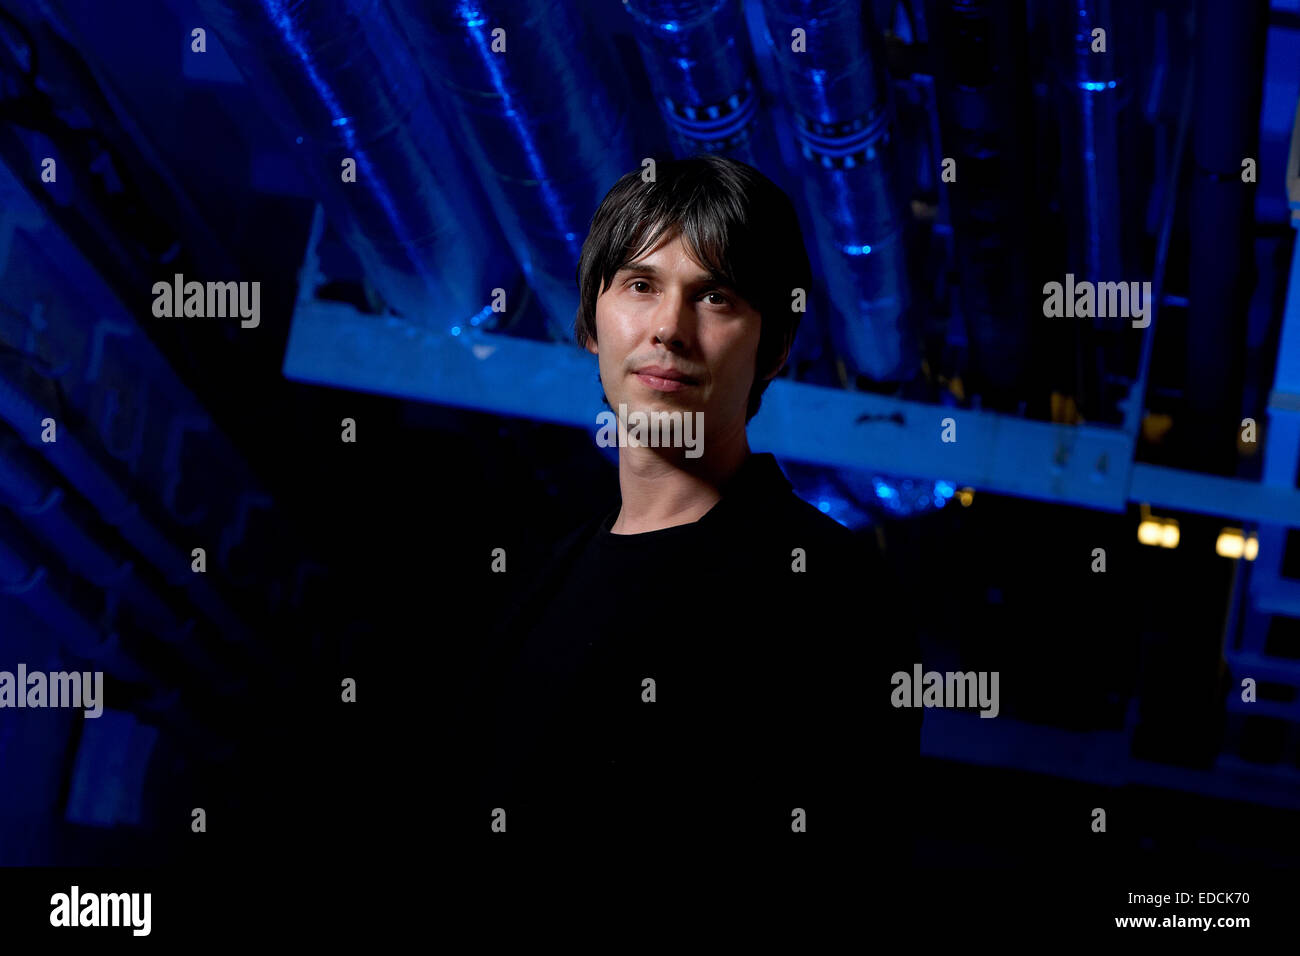 Prof. Brian Cox OBE particle physicist, TV science presenter, ex member of band D:ream pictured at University of Birmingham. Stock Photo